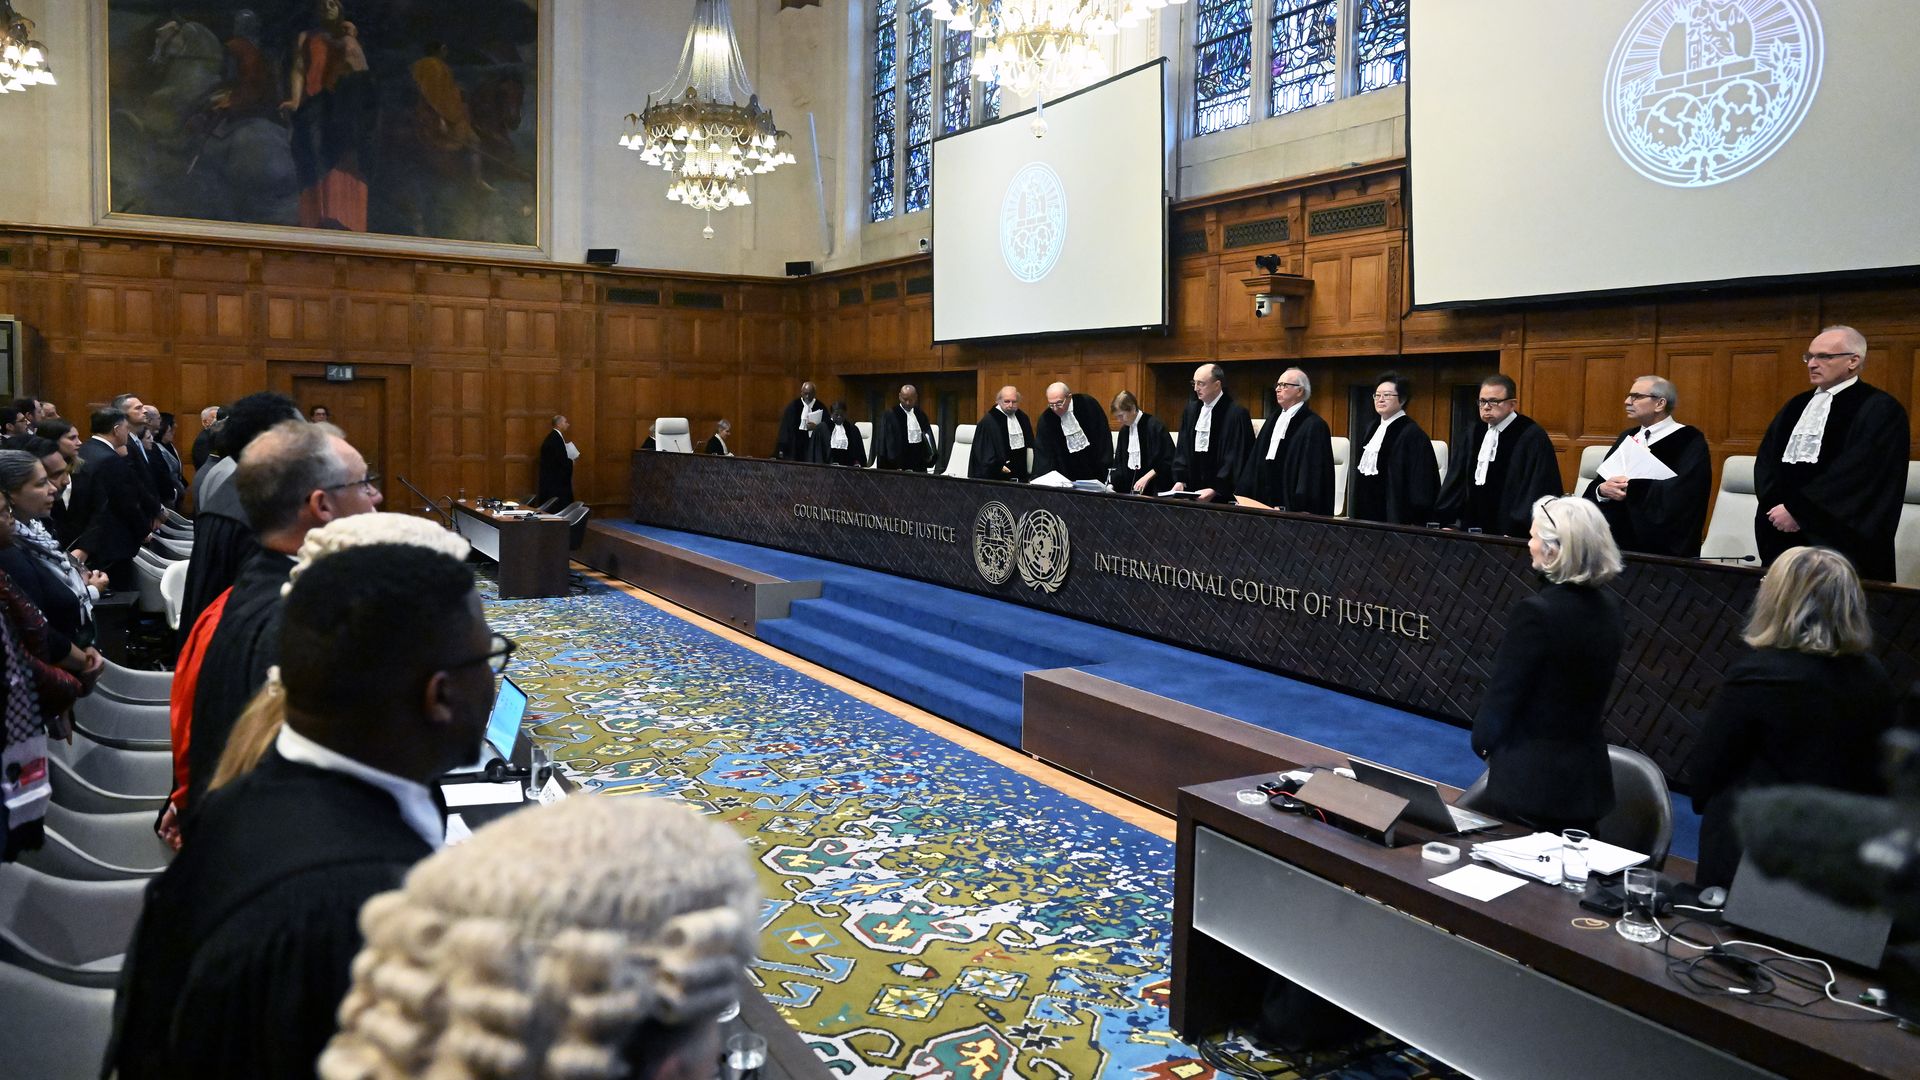 Judges take their seats prior to the hearing of Israel's defense at the International Court of Justice on Jan. 12. Photo: Dursun Aydemir/Anadolu via Getty Images